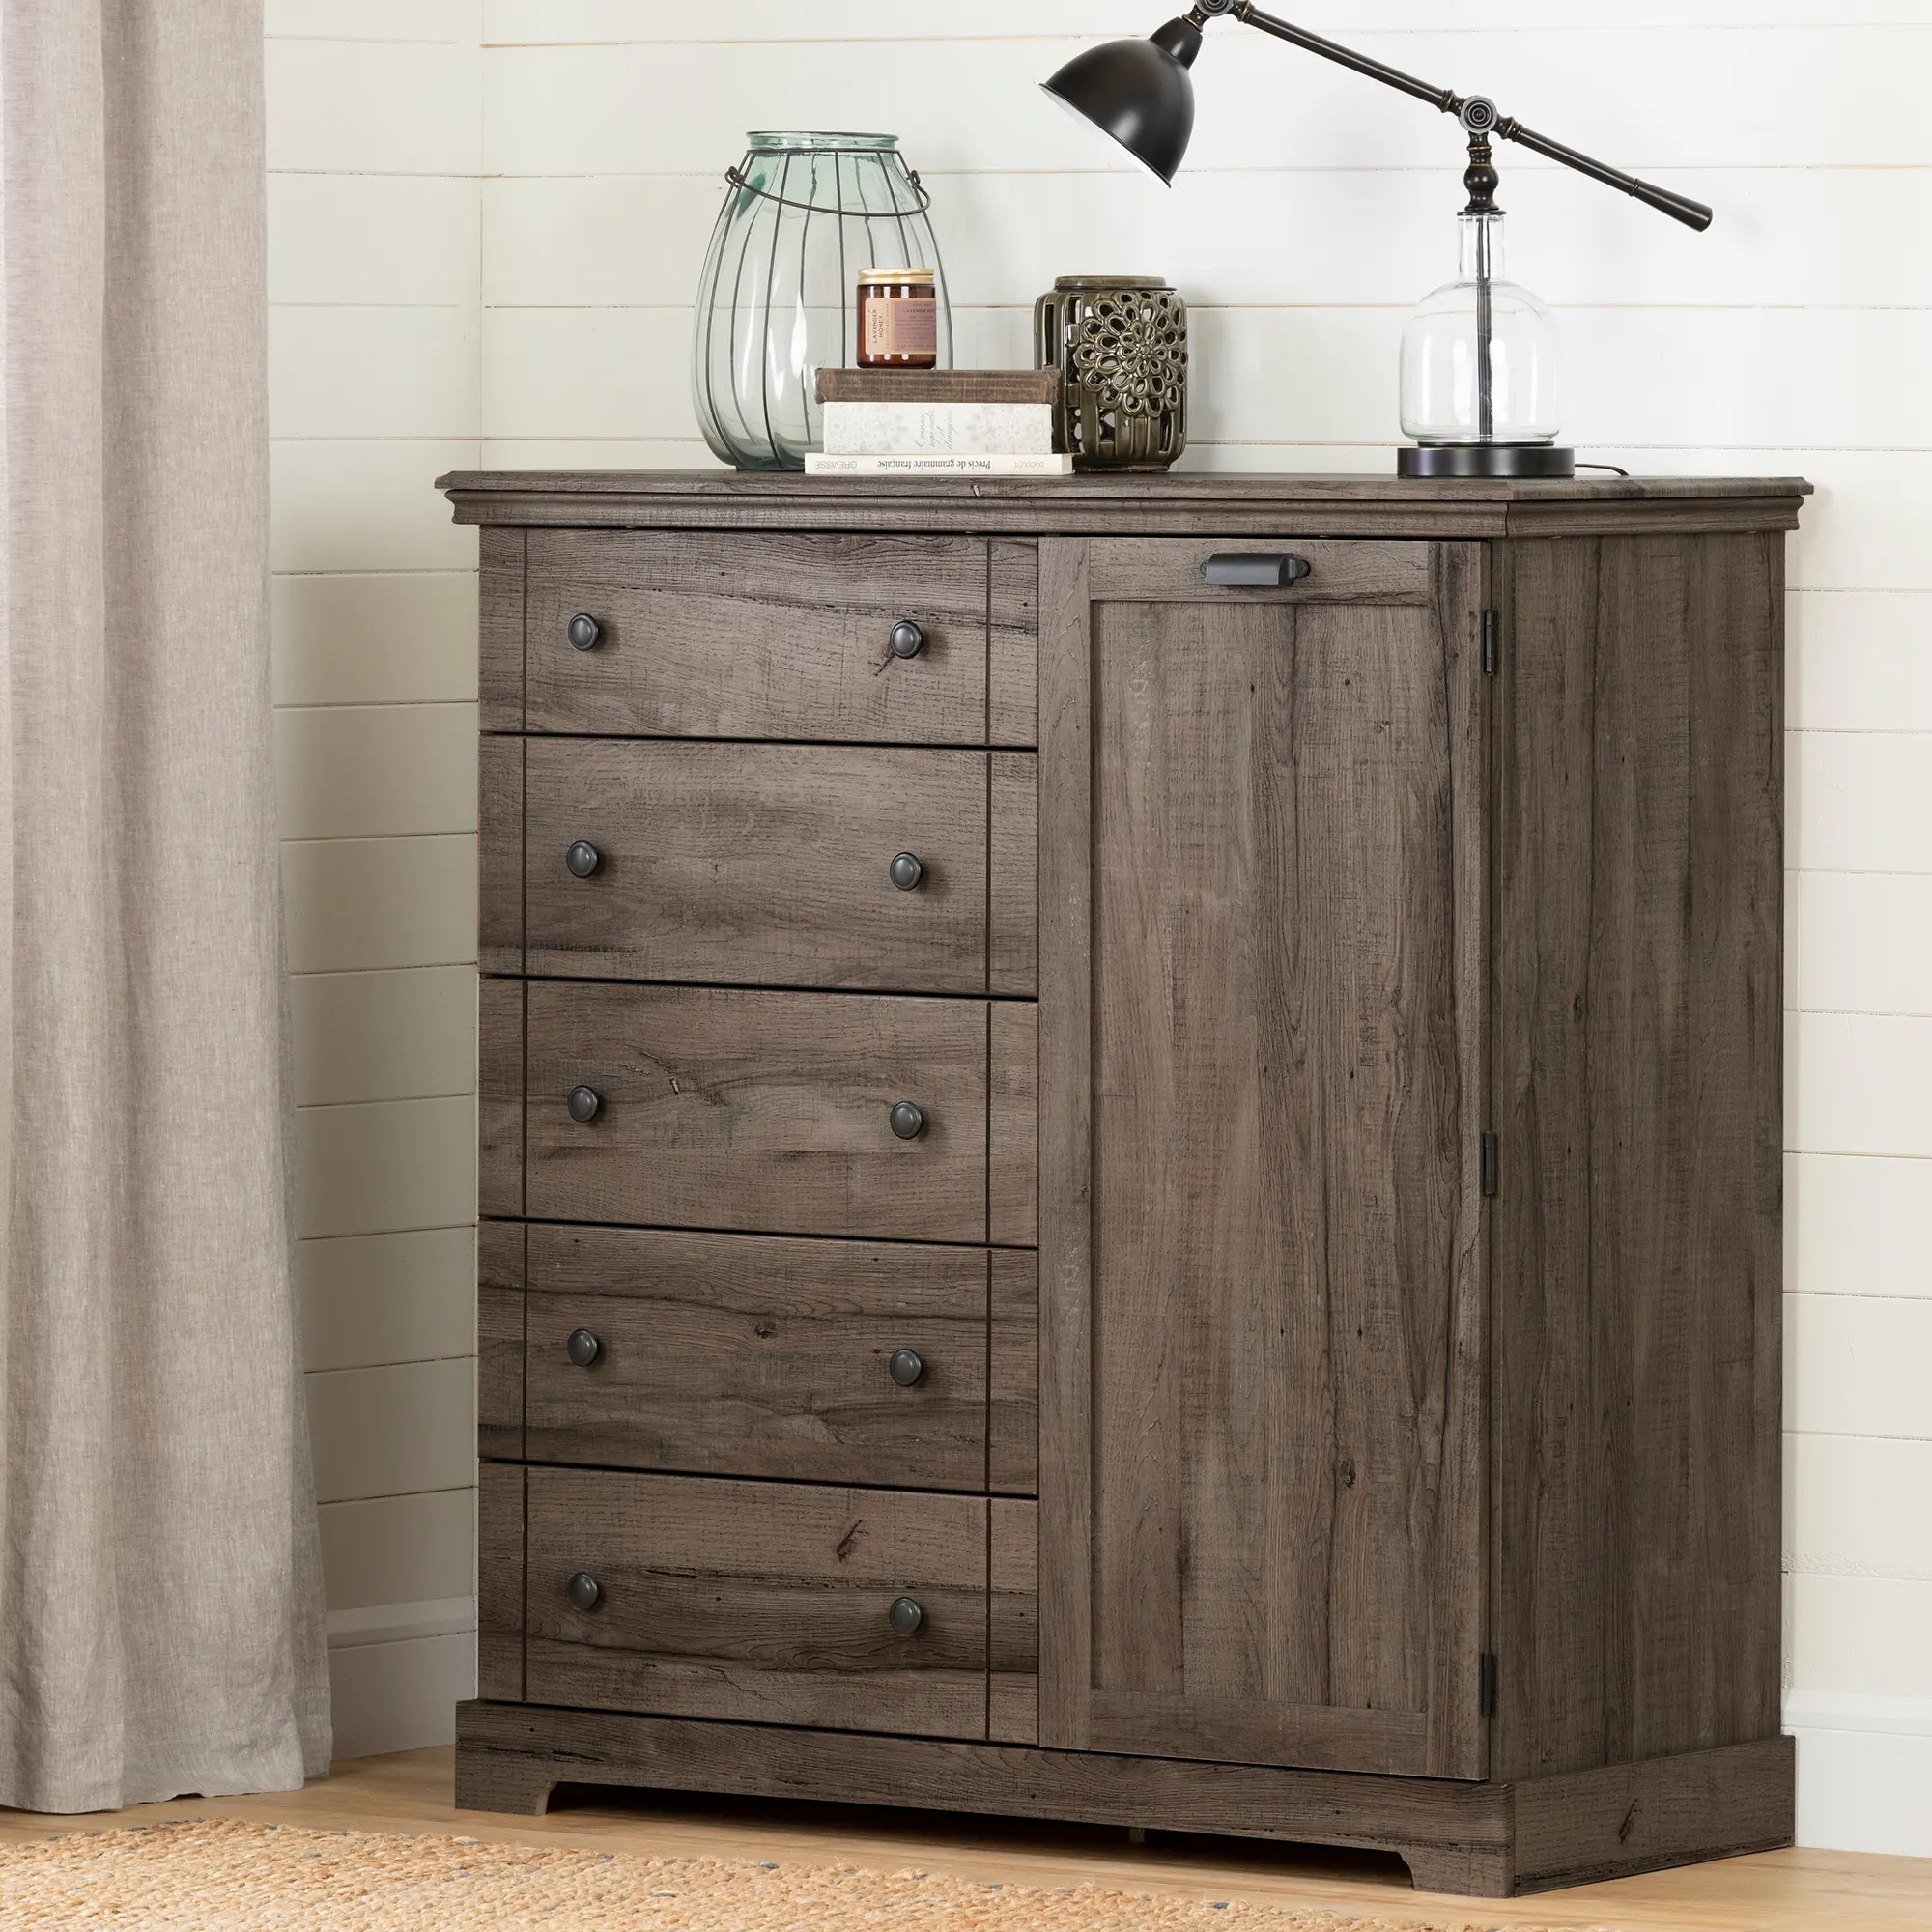 Lilak Cottage Fall Oak Door Chest with Drawers - South Shore